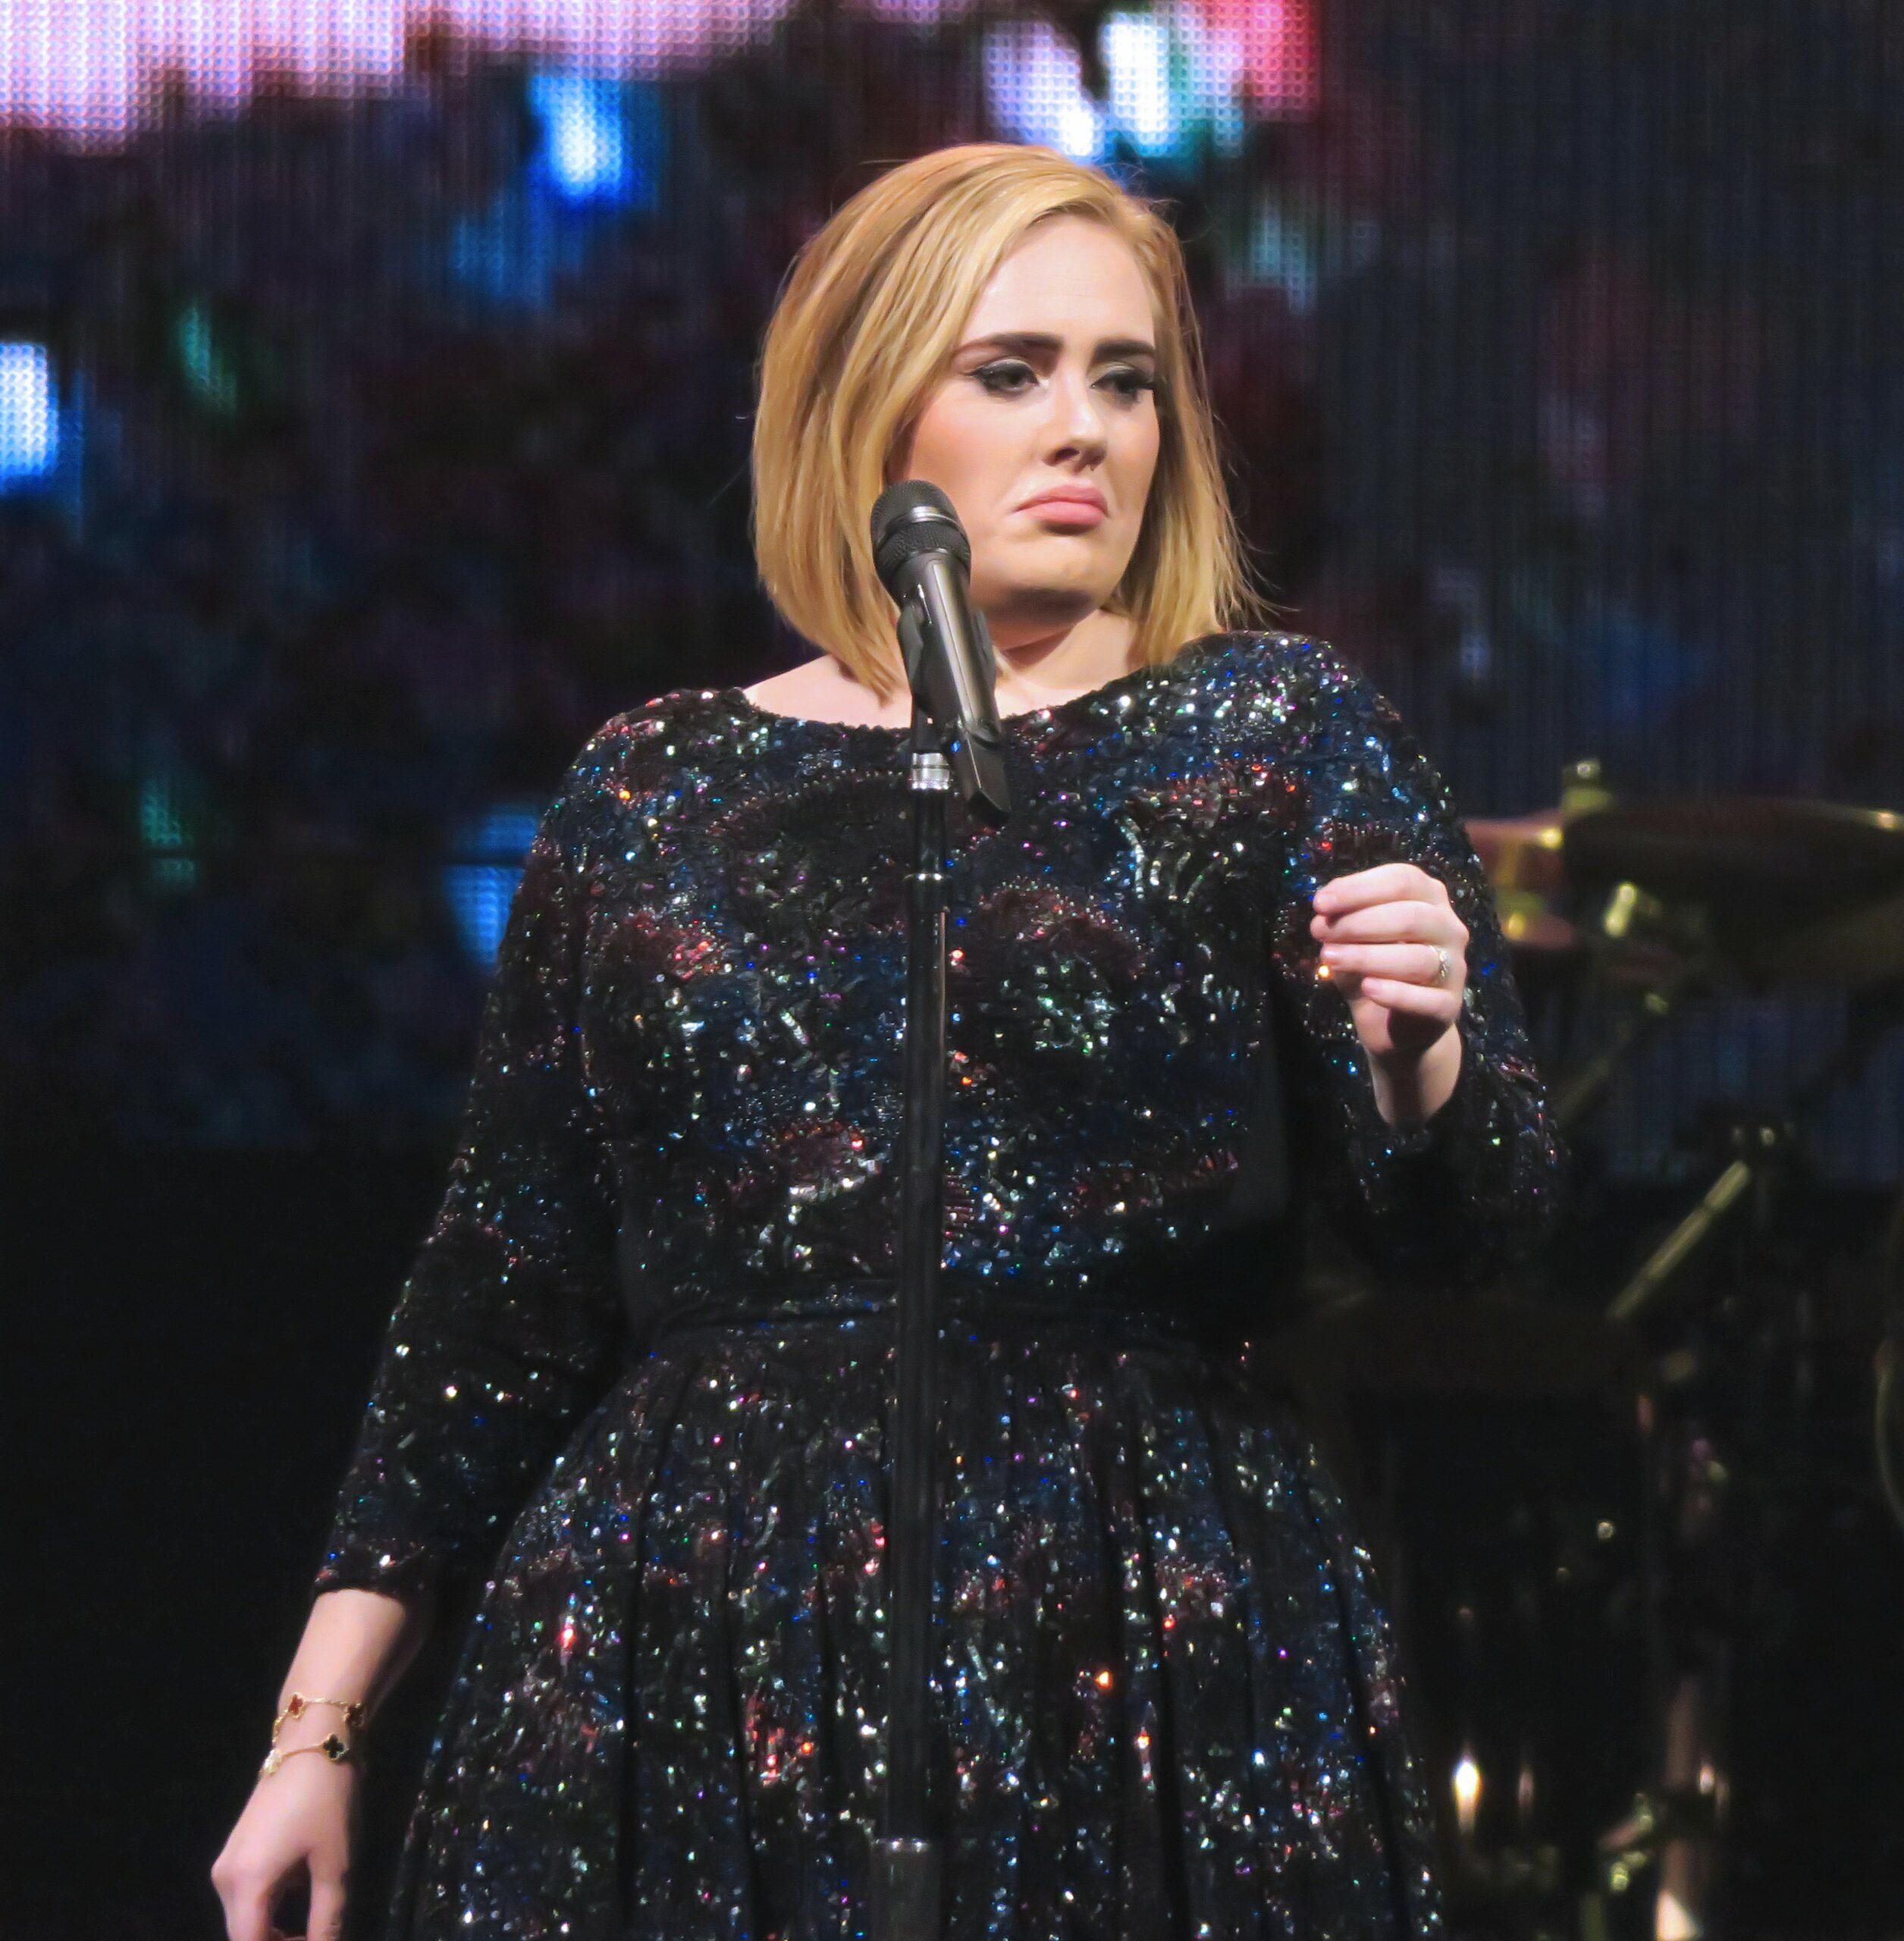 Adele finishes off her sold out US tour